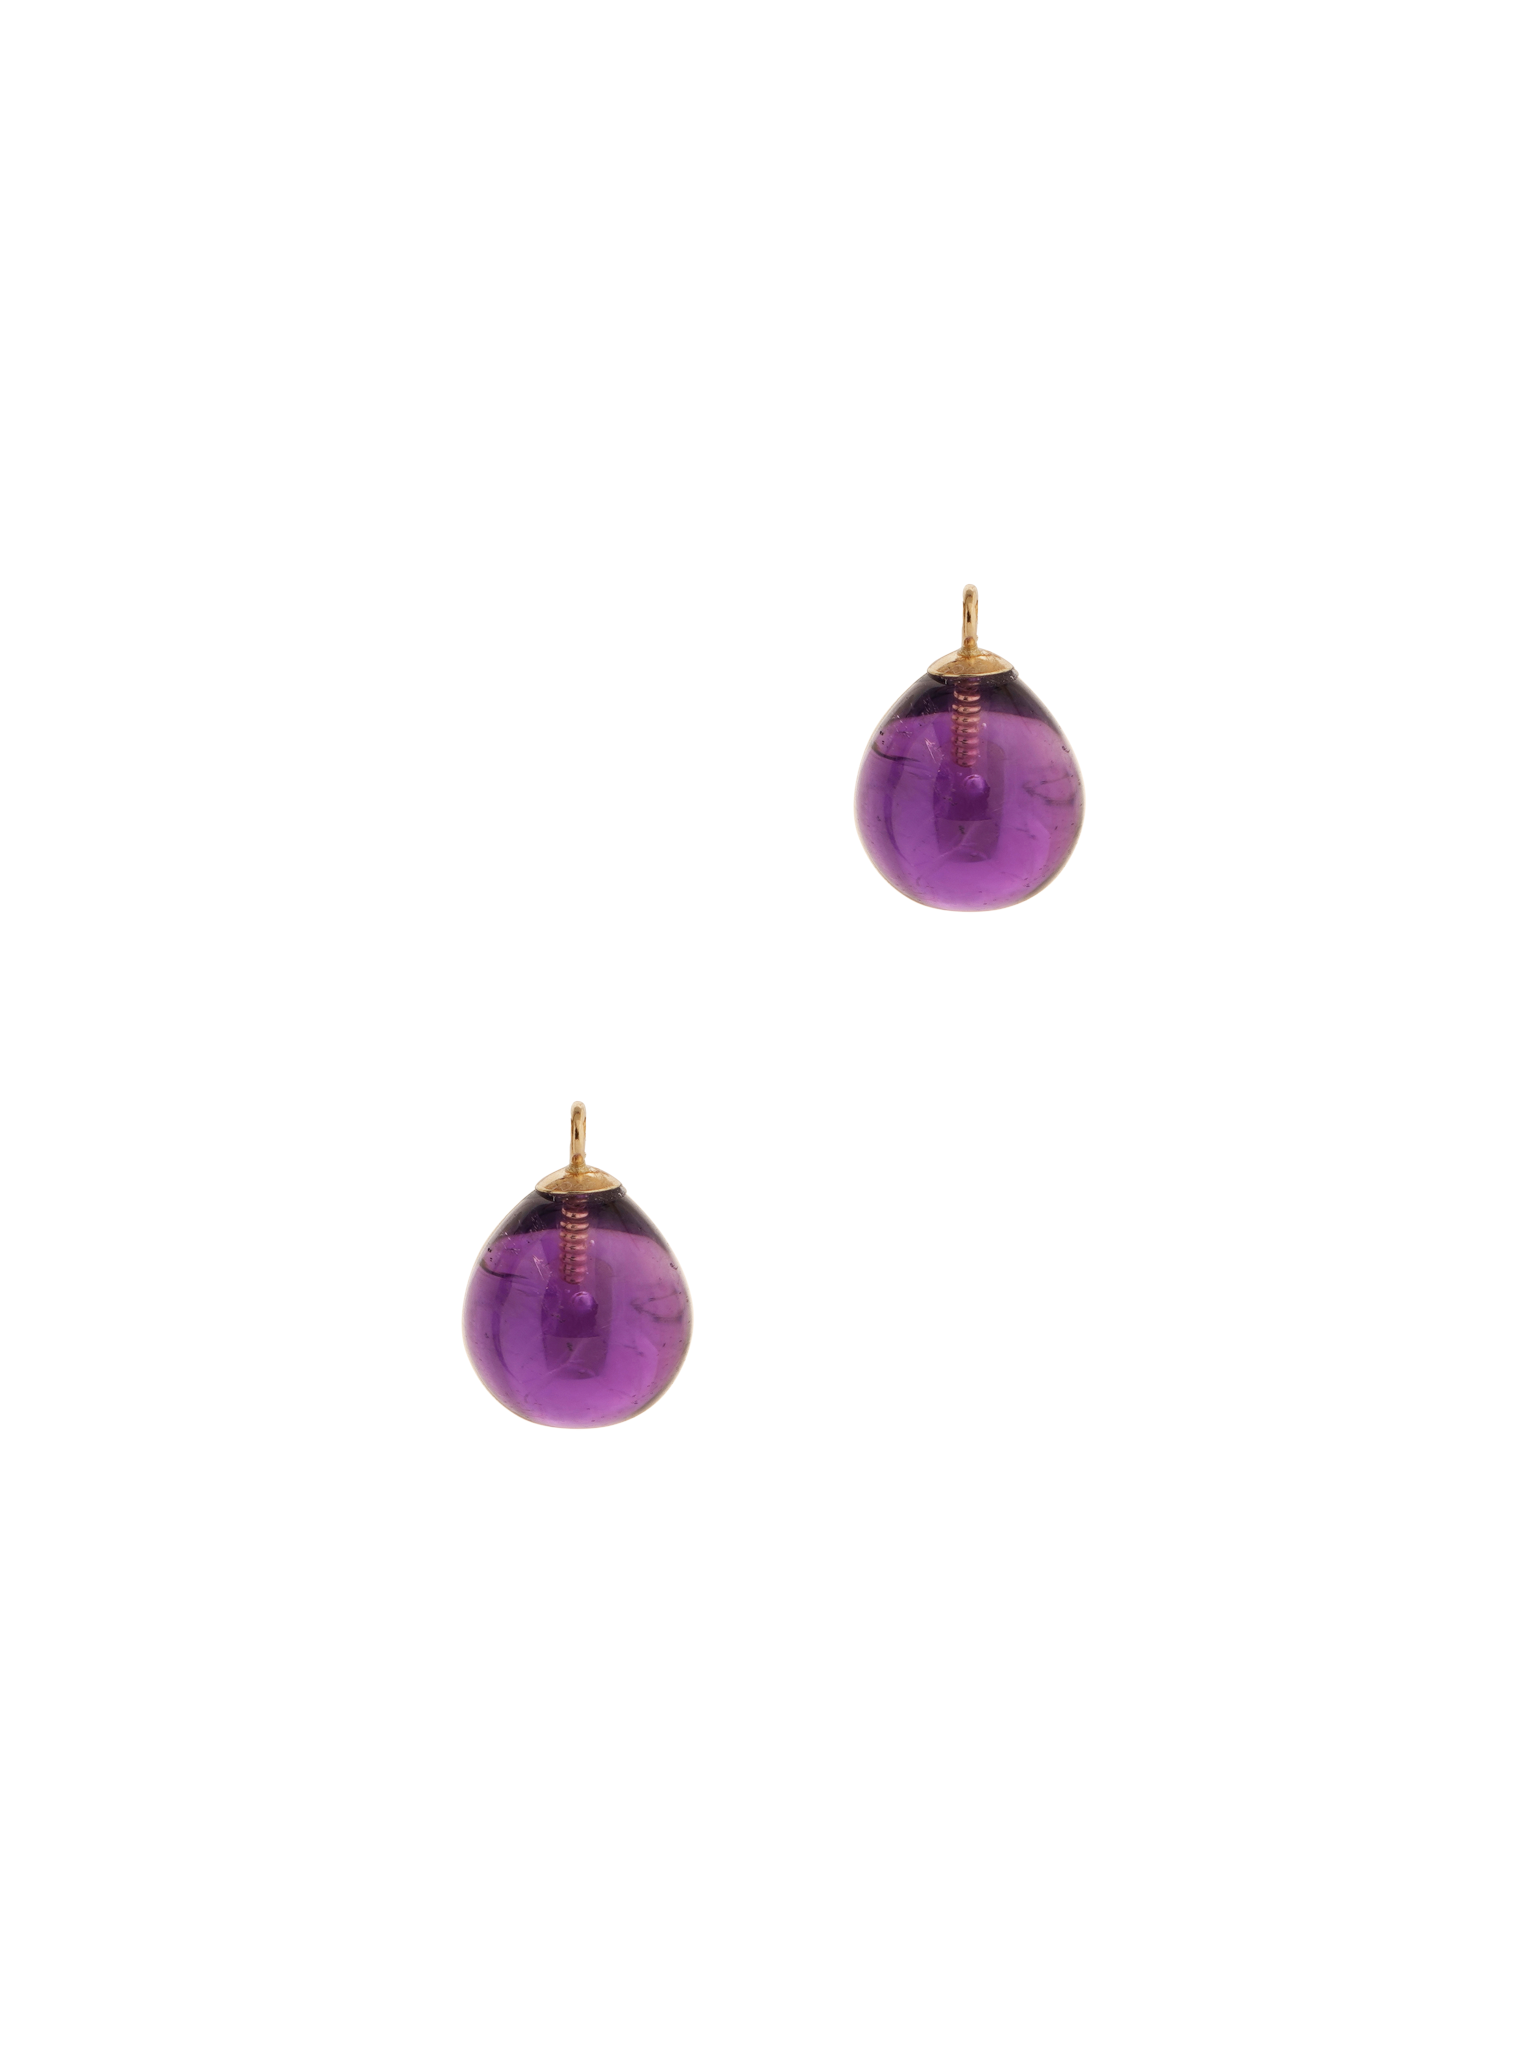 Amethyst droppers, 9ct gold